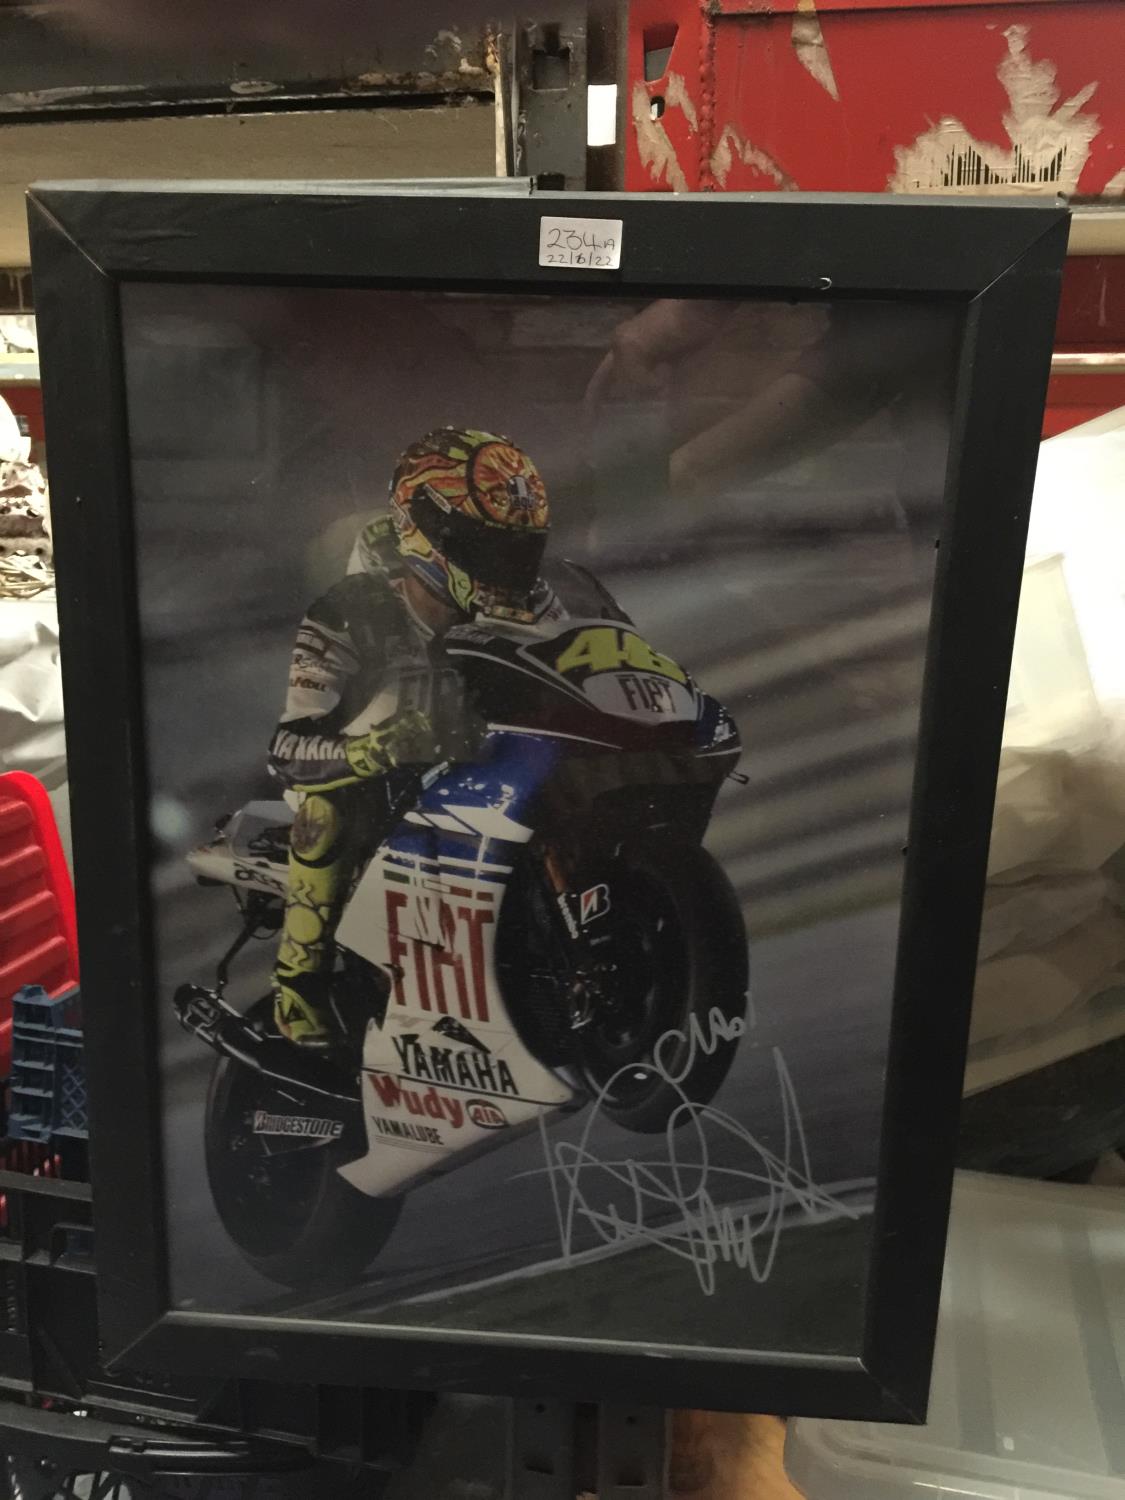 A FRAMED PRINT OF VALENTINO ROSSI ON A YAMAHA FIAT NO. 46 - SIGNED- NO AUTHENTICATION